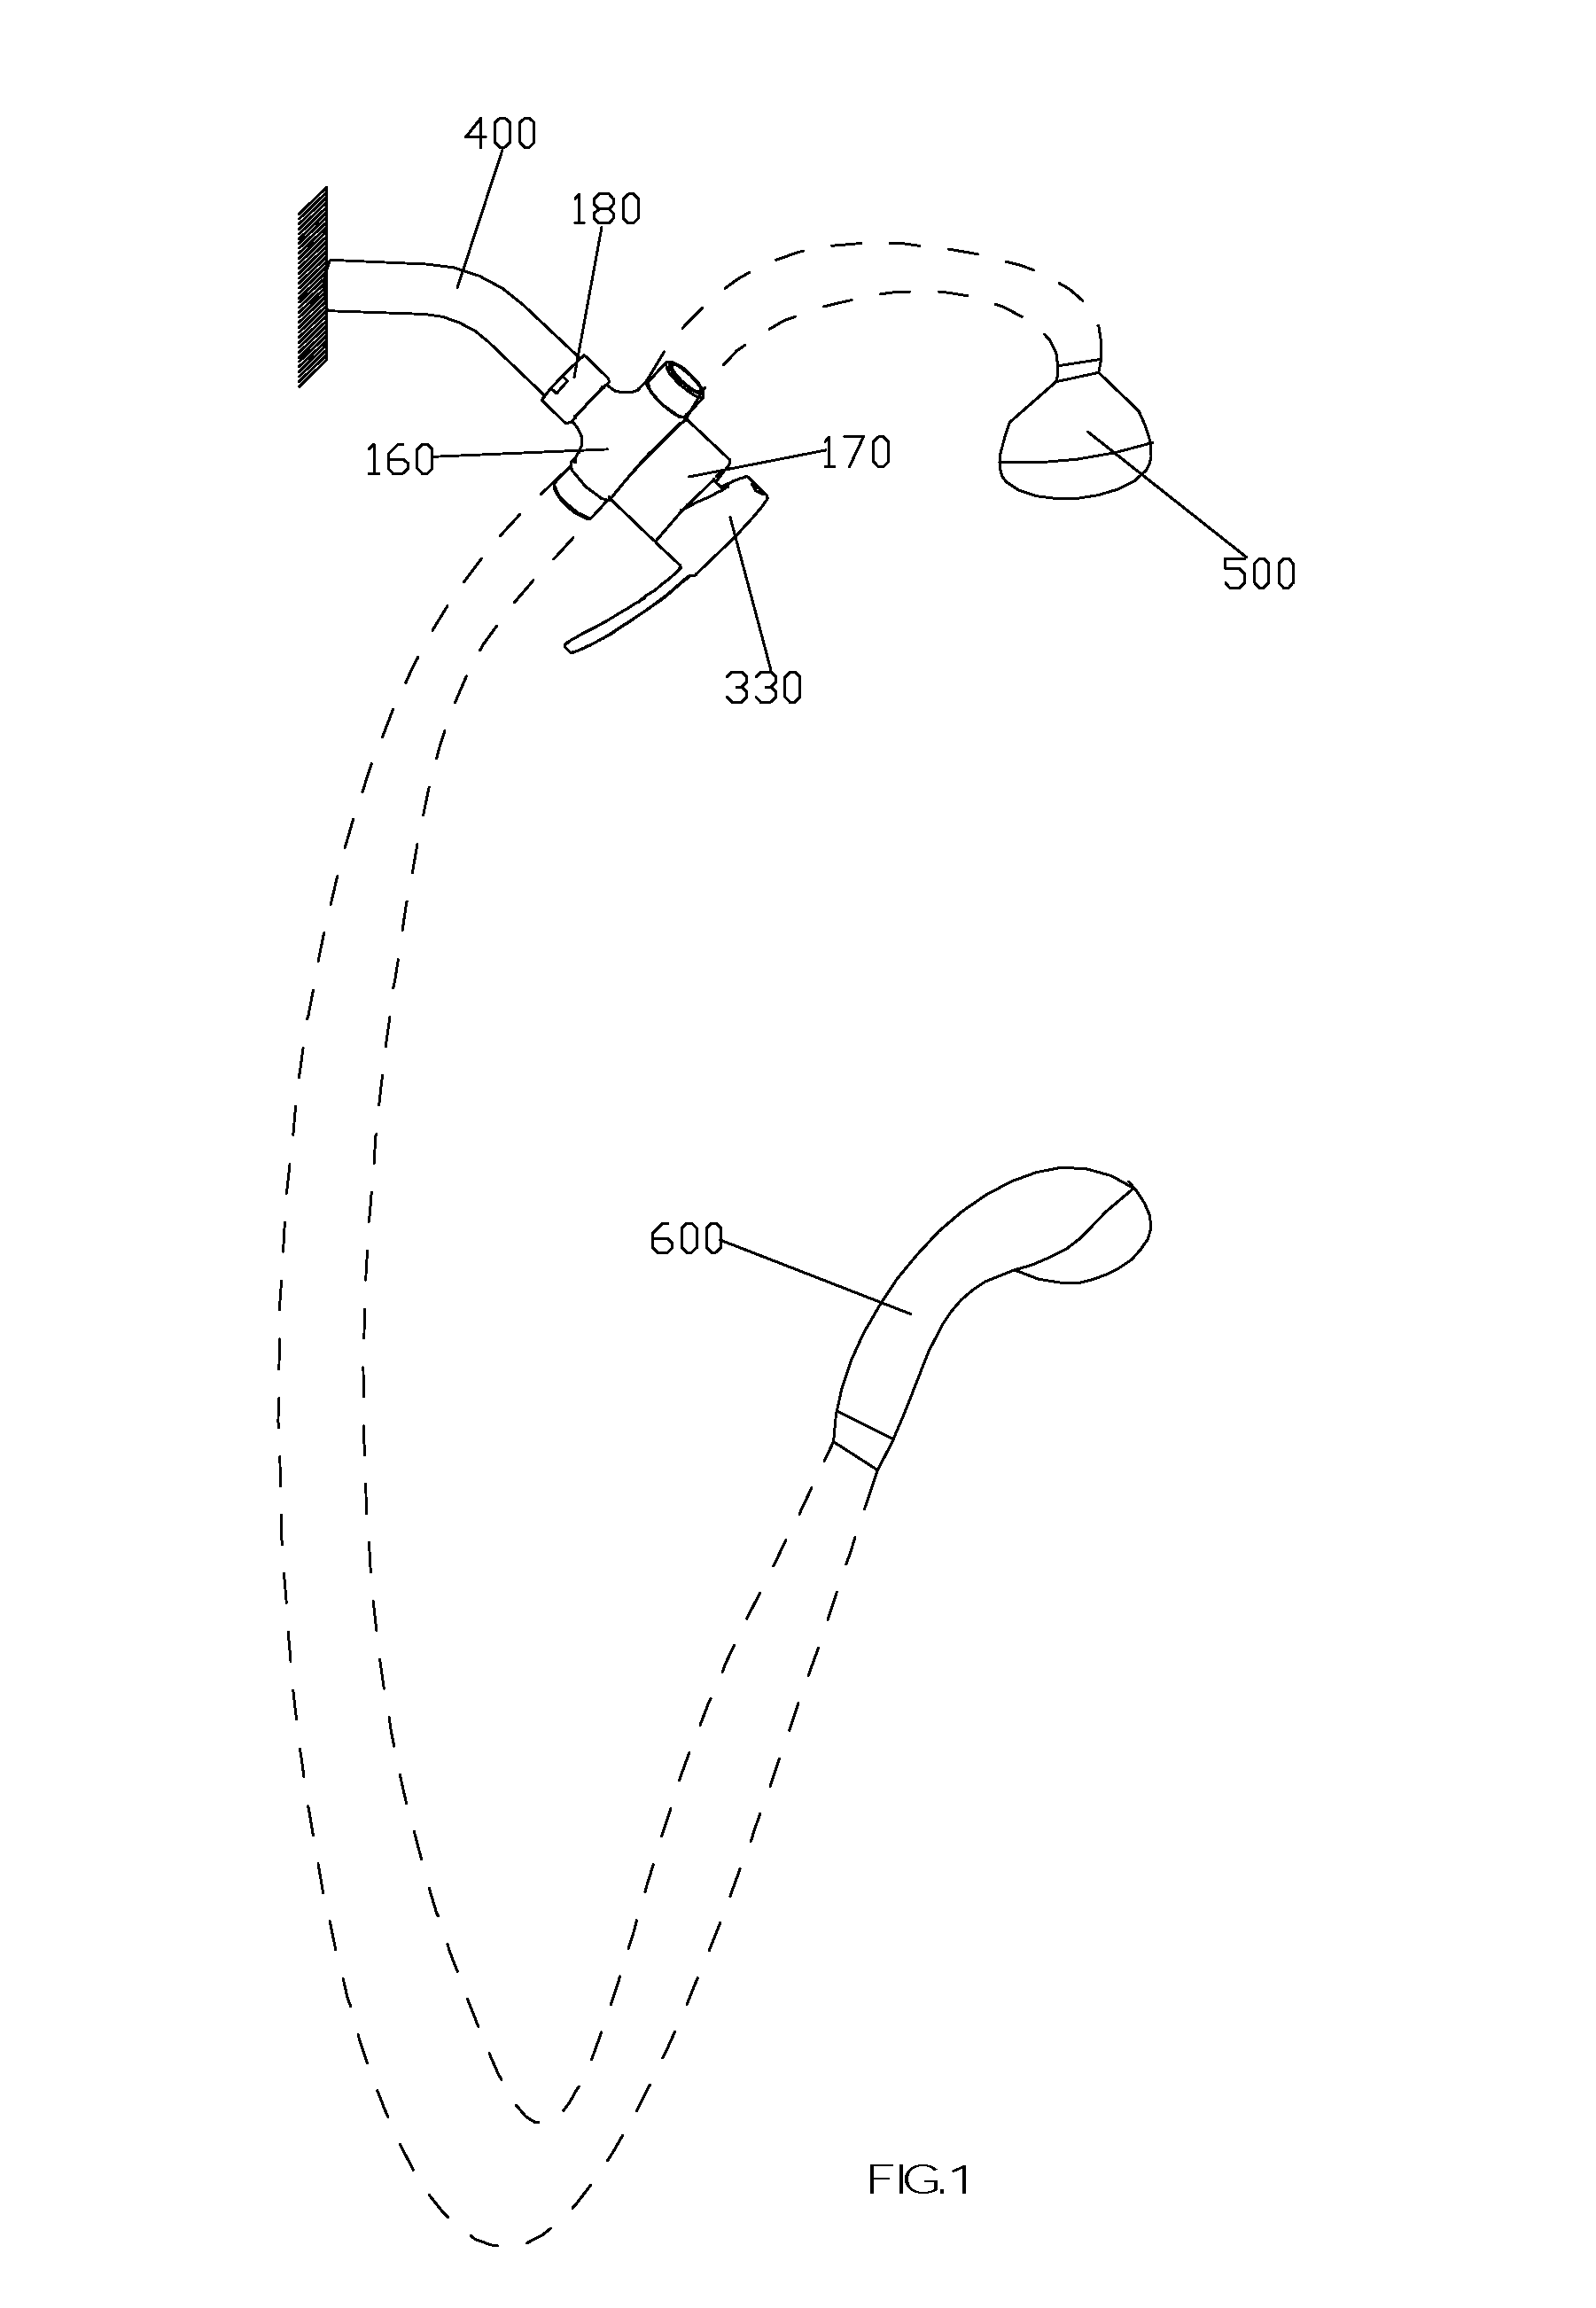 Valve for switching waterways and adjusting flow